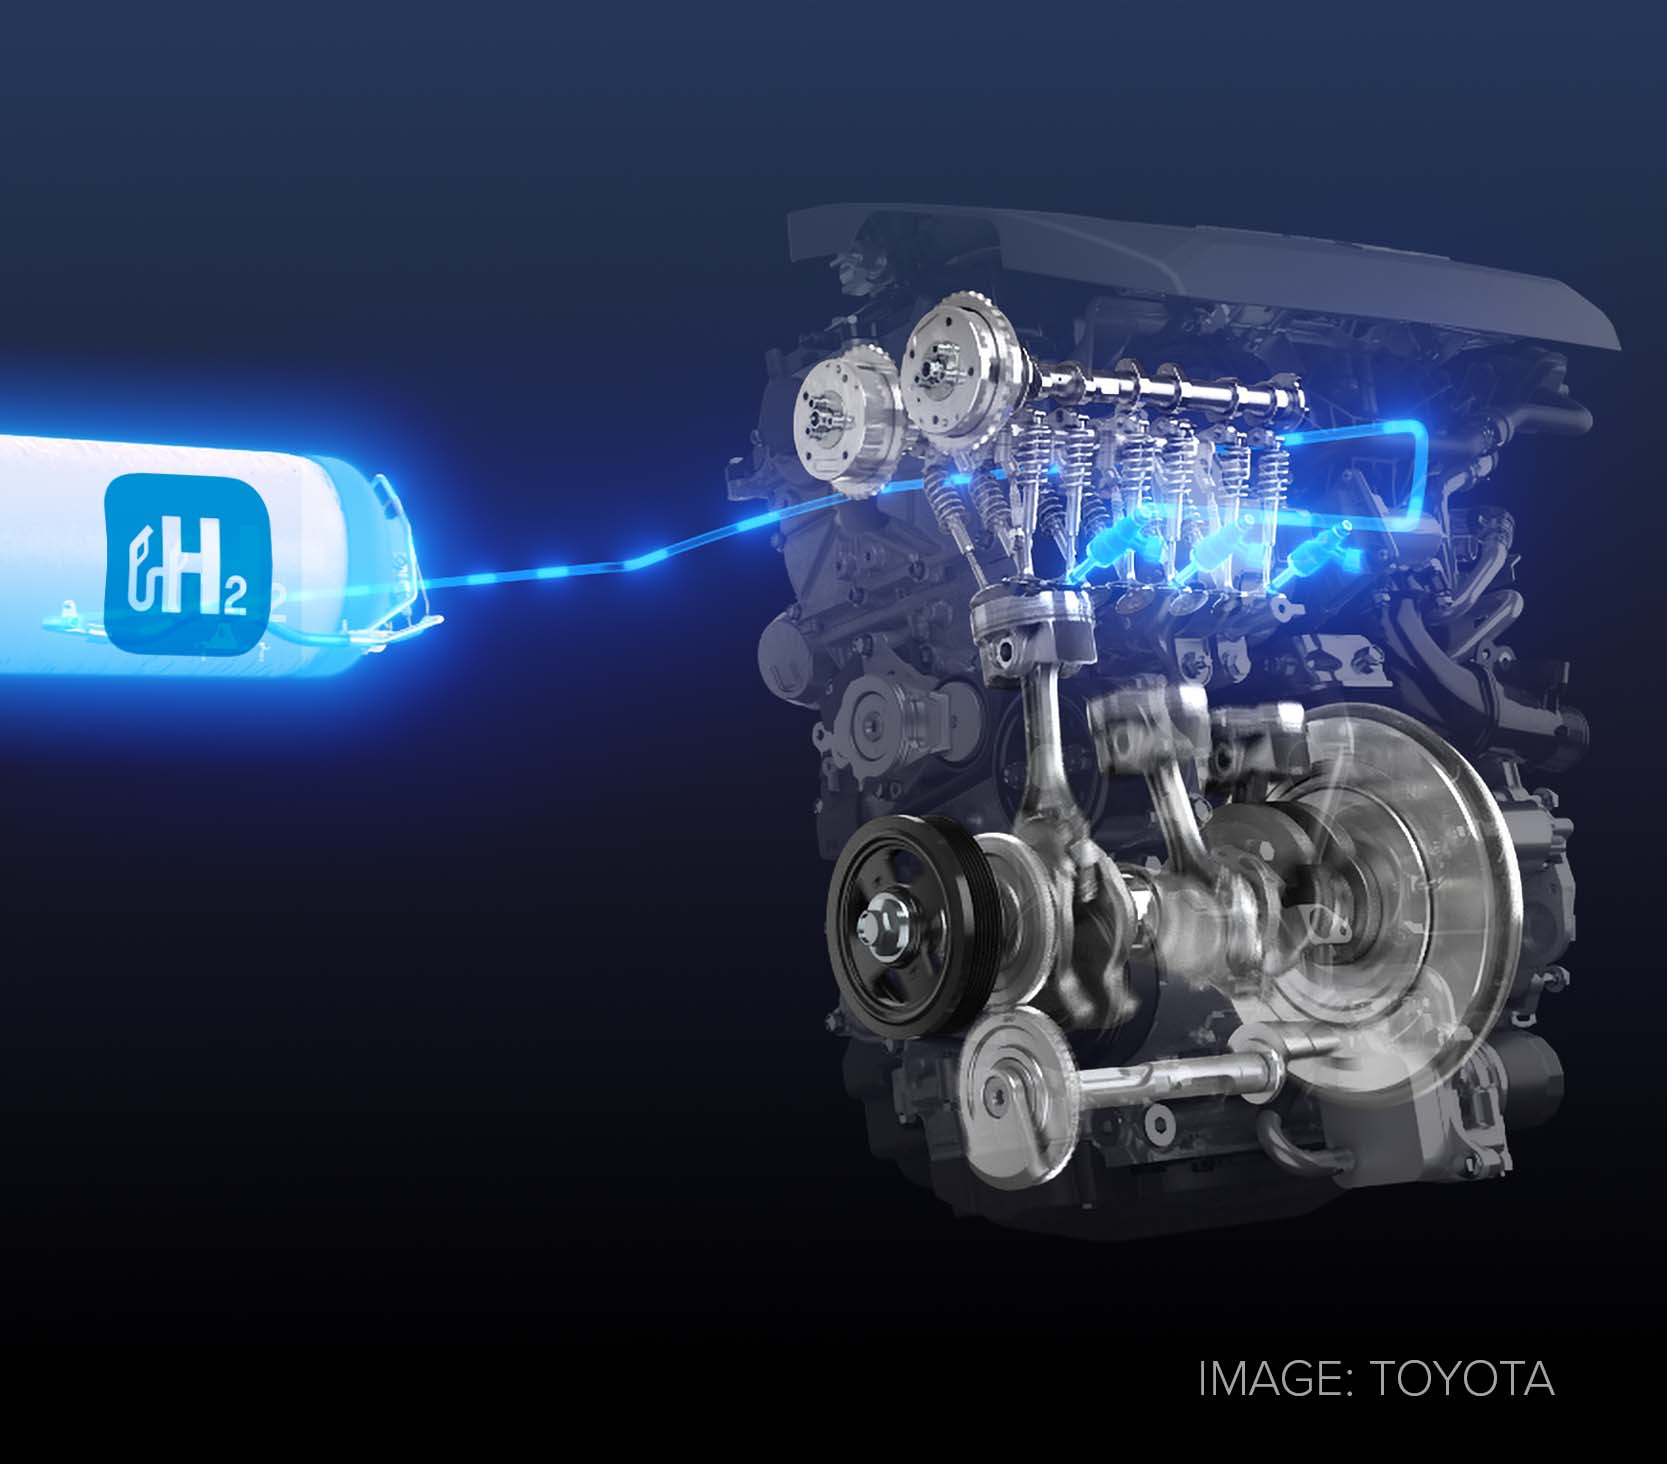 Featured image for “Electrically assisted boosting is a big opportunity for Hydrogen combustion engines”